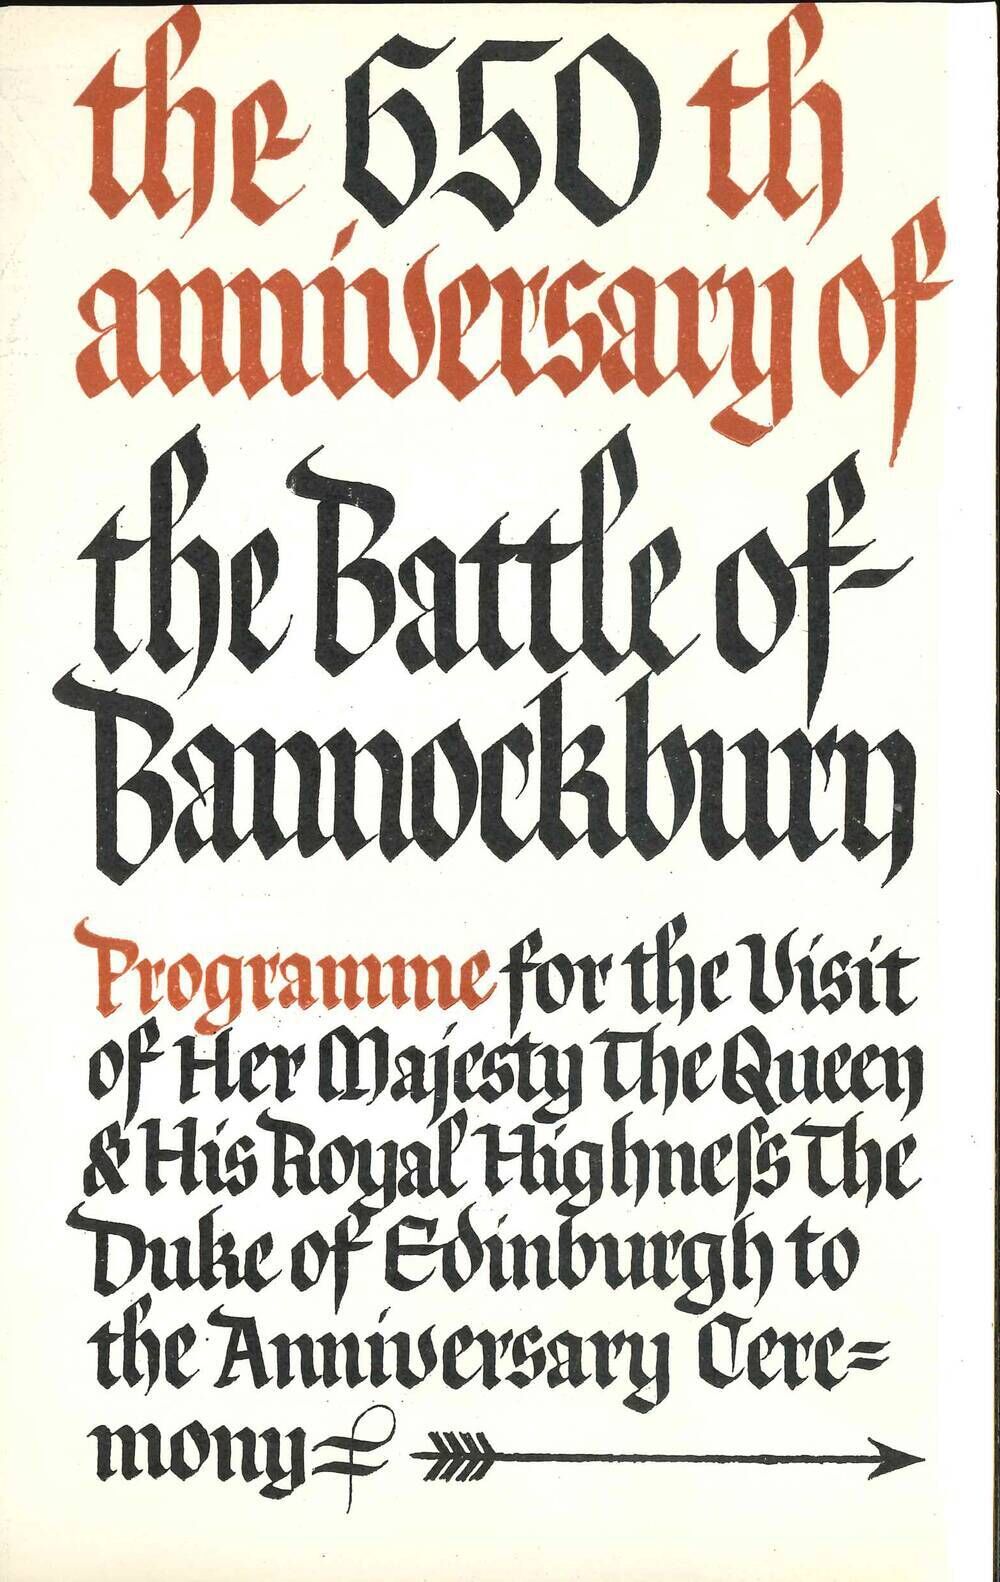 The 650th anniversary of the Battle of Bannockburn - programme for the visit of Her Majesty The Queen and His Royal Highness the Duke of Edinburgh to the Anniversary Ceremony